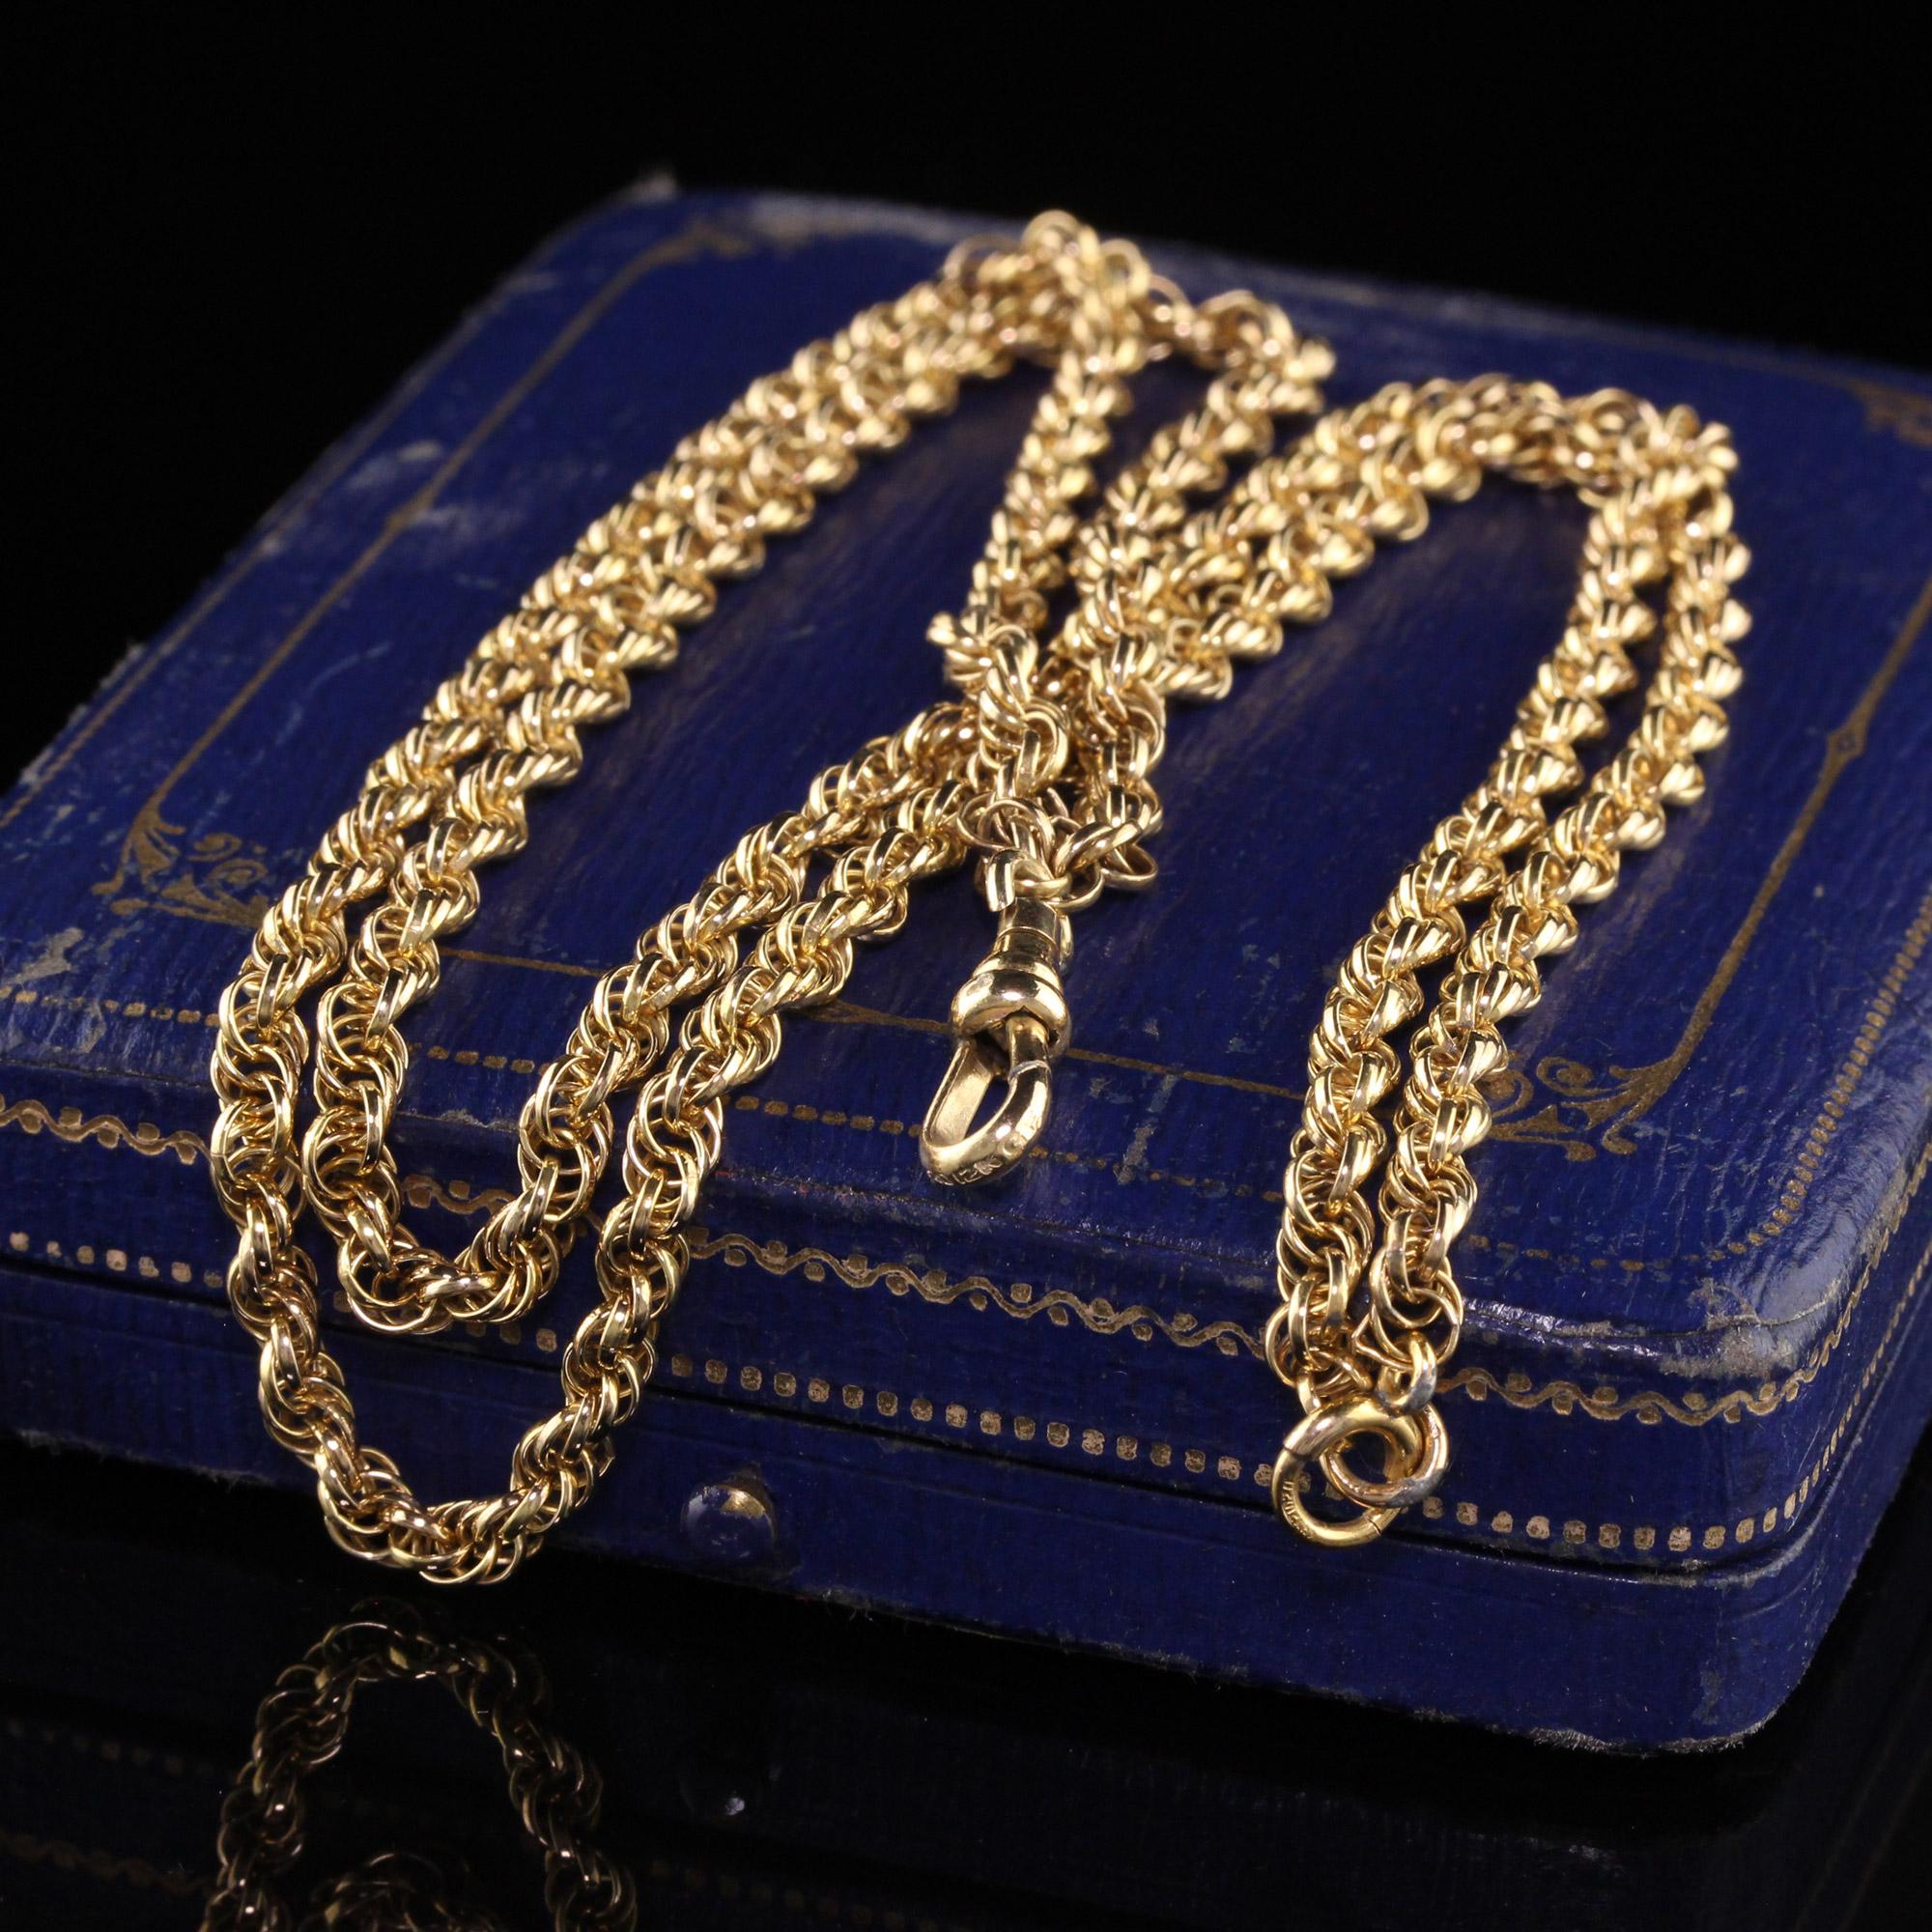 Beautiful Antique Victorian 10K Yellow Gold Rope Link Chain Necklace - 27 inches. This beautiful necklace is crafted in 10k yellow gold. The chain is made in a handmade loose rope chain and has a fob that can have a pendant attached to it.

Item